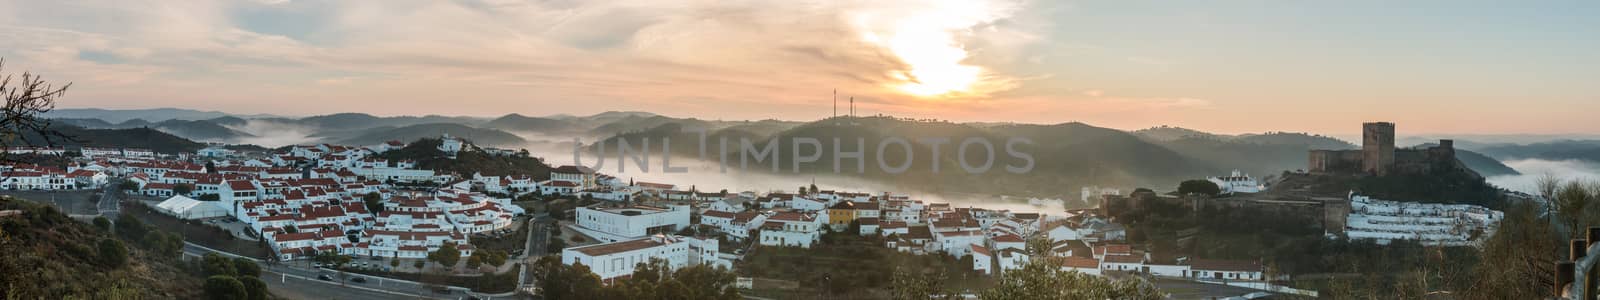 Wide view of Mertola village engulfed on a foggy morning.